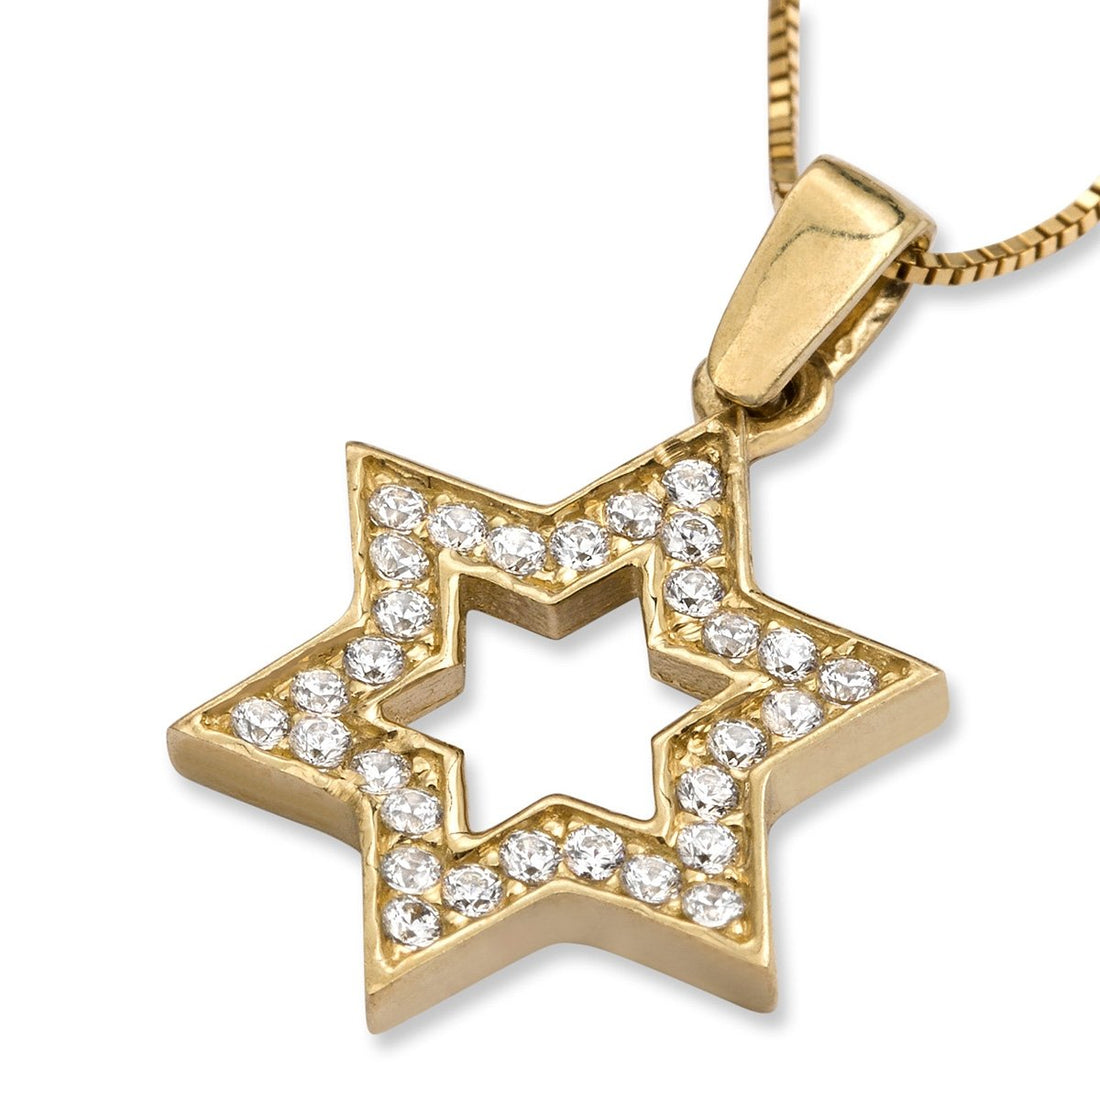 14K Yellow Gold Star of David Outline Pendant Necklace With Cubic Zirconia Stones